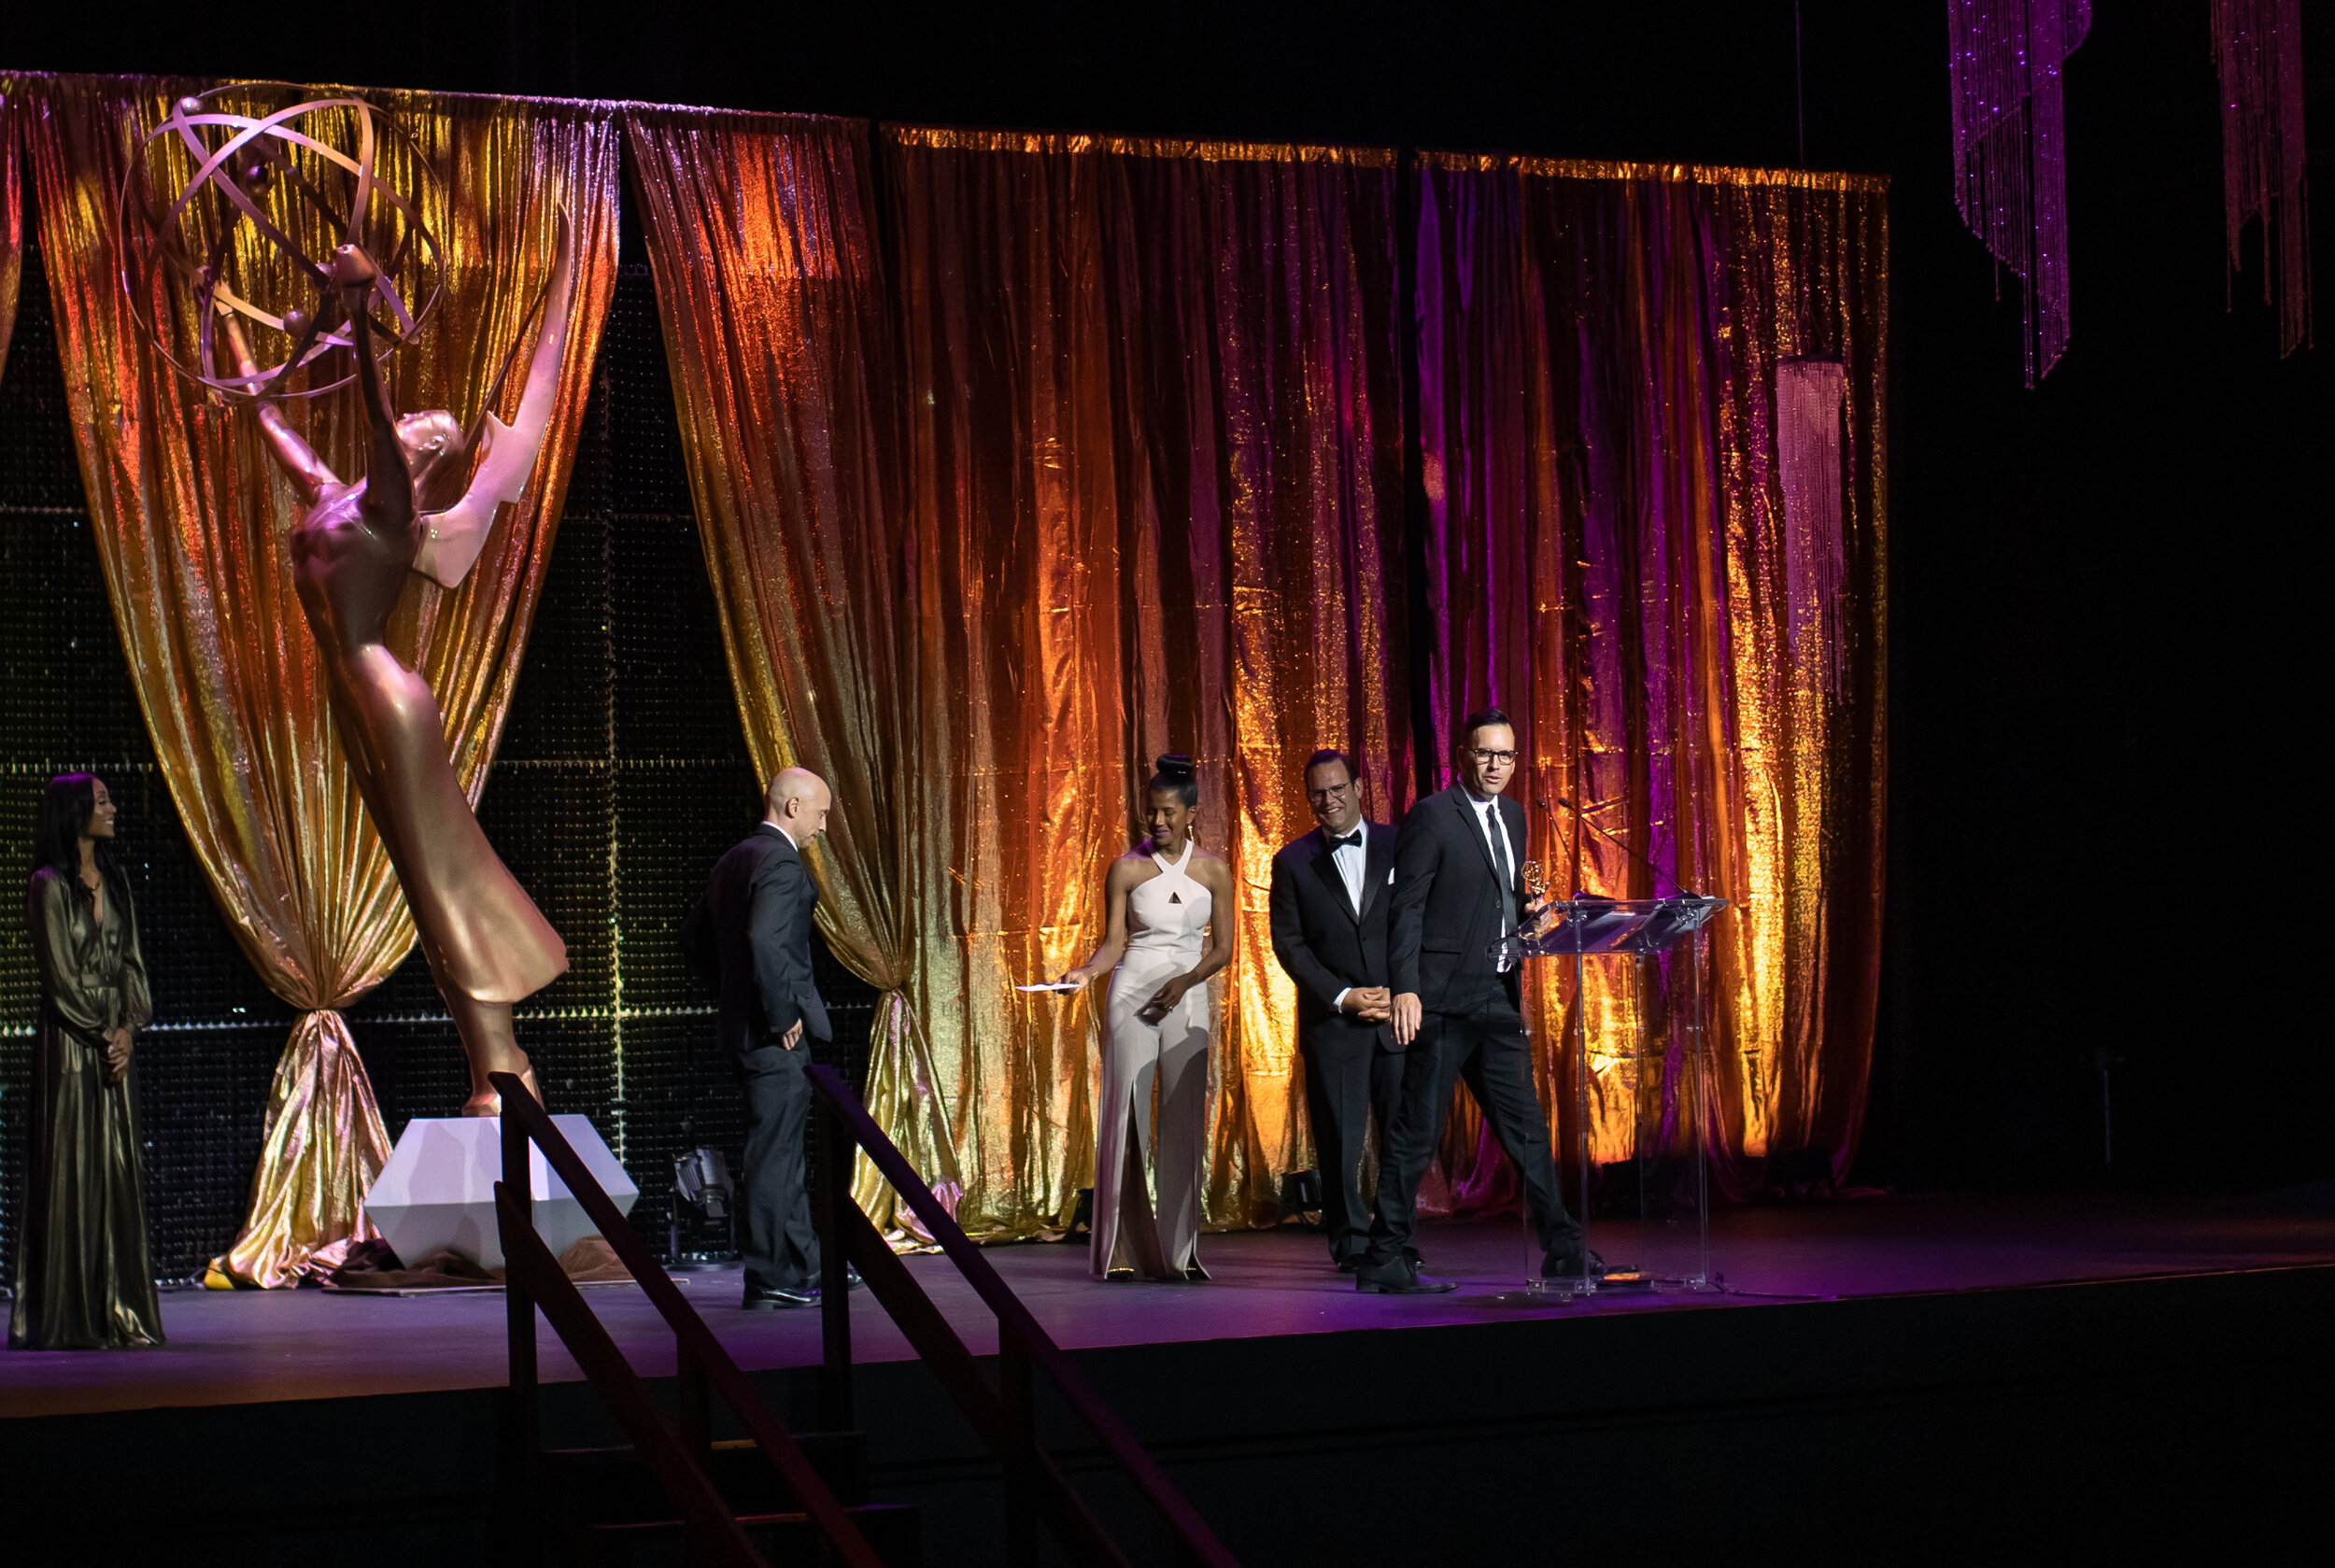  Pop Mod Photo co-owner Ryan Garza takes the stage to accept his EMMY award for documentary video work for the Detroit Free Press. 